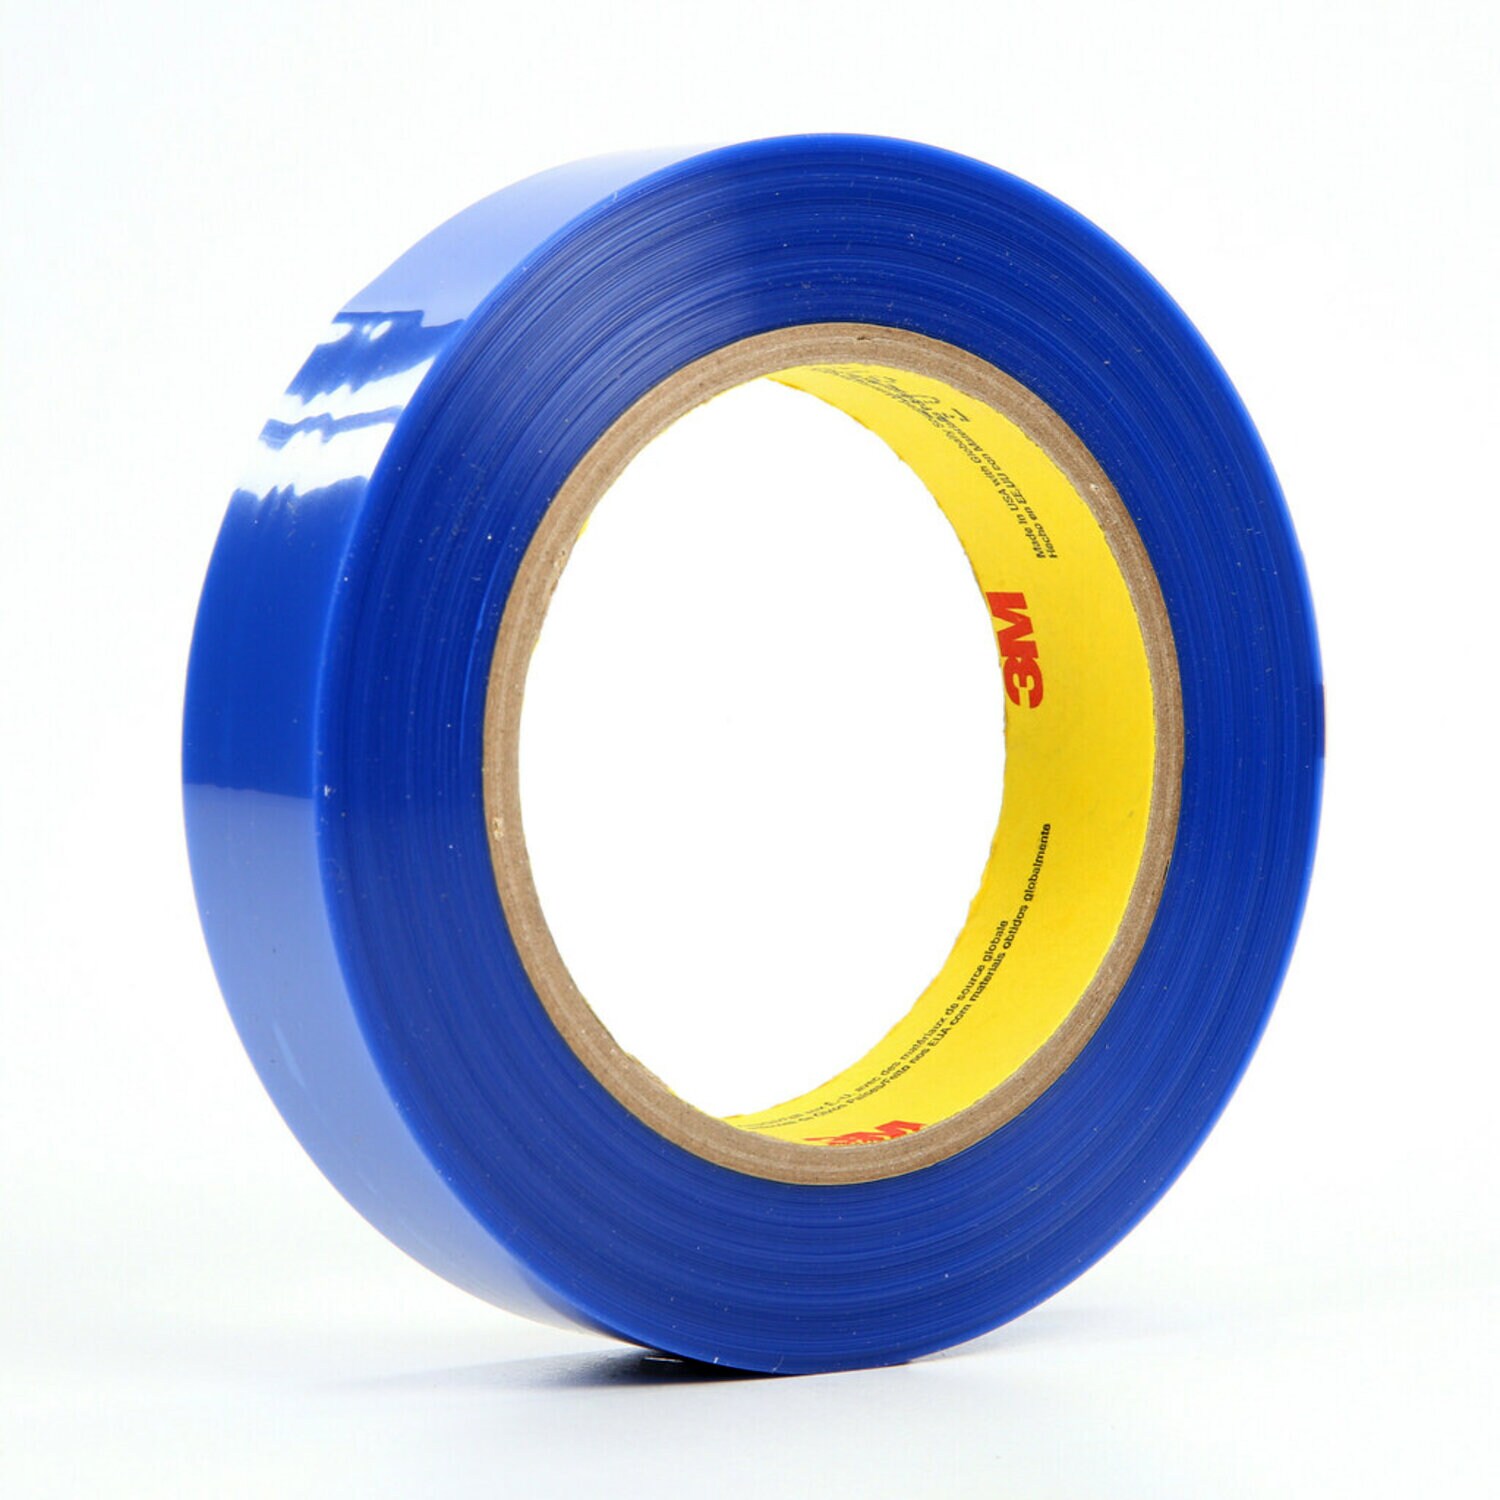 7000049602 - 3M Polyester Tape 8902, Blue, 1 in x 72 yd, 3.4 mil, 36 rolls per case